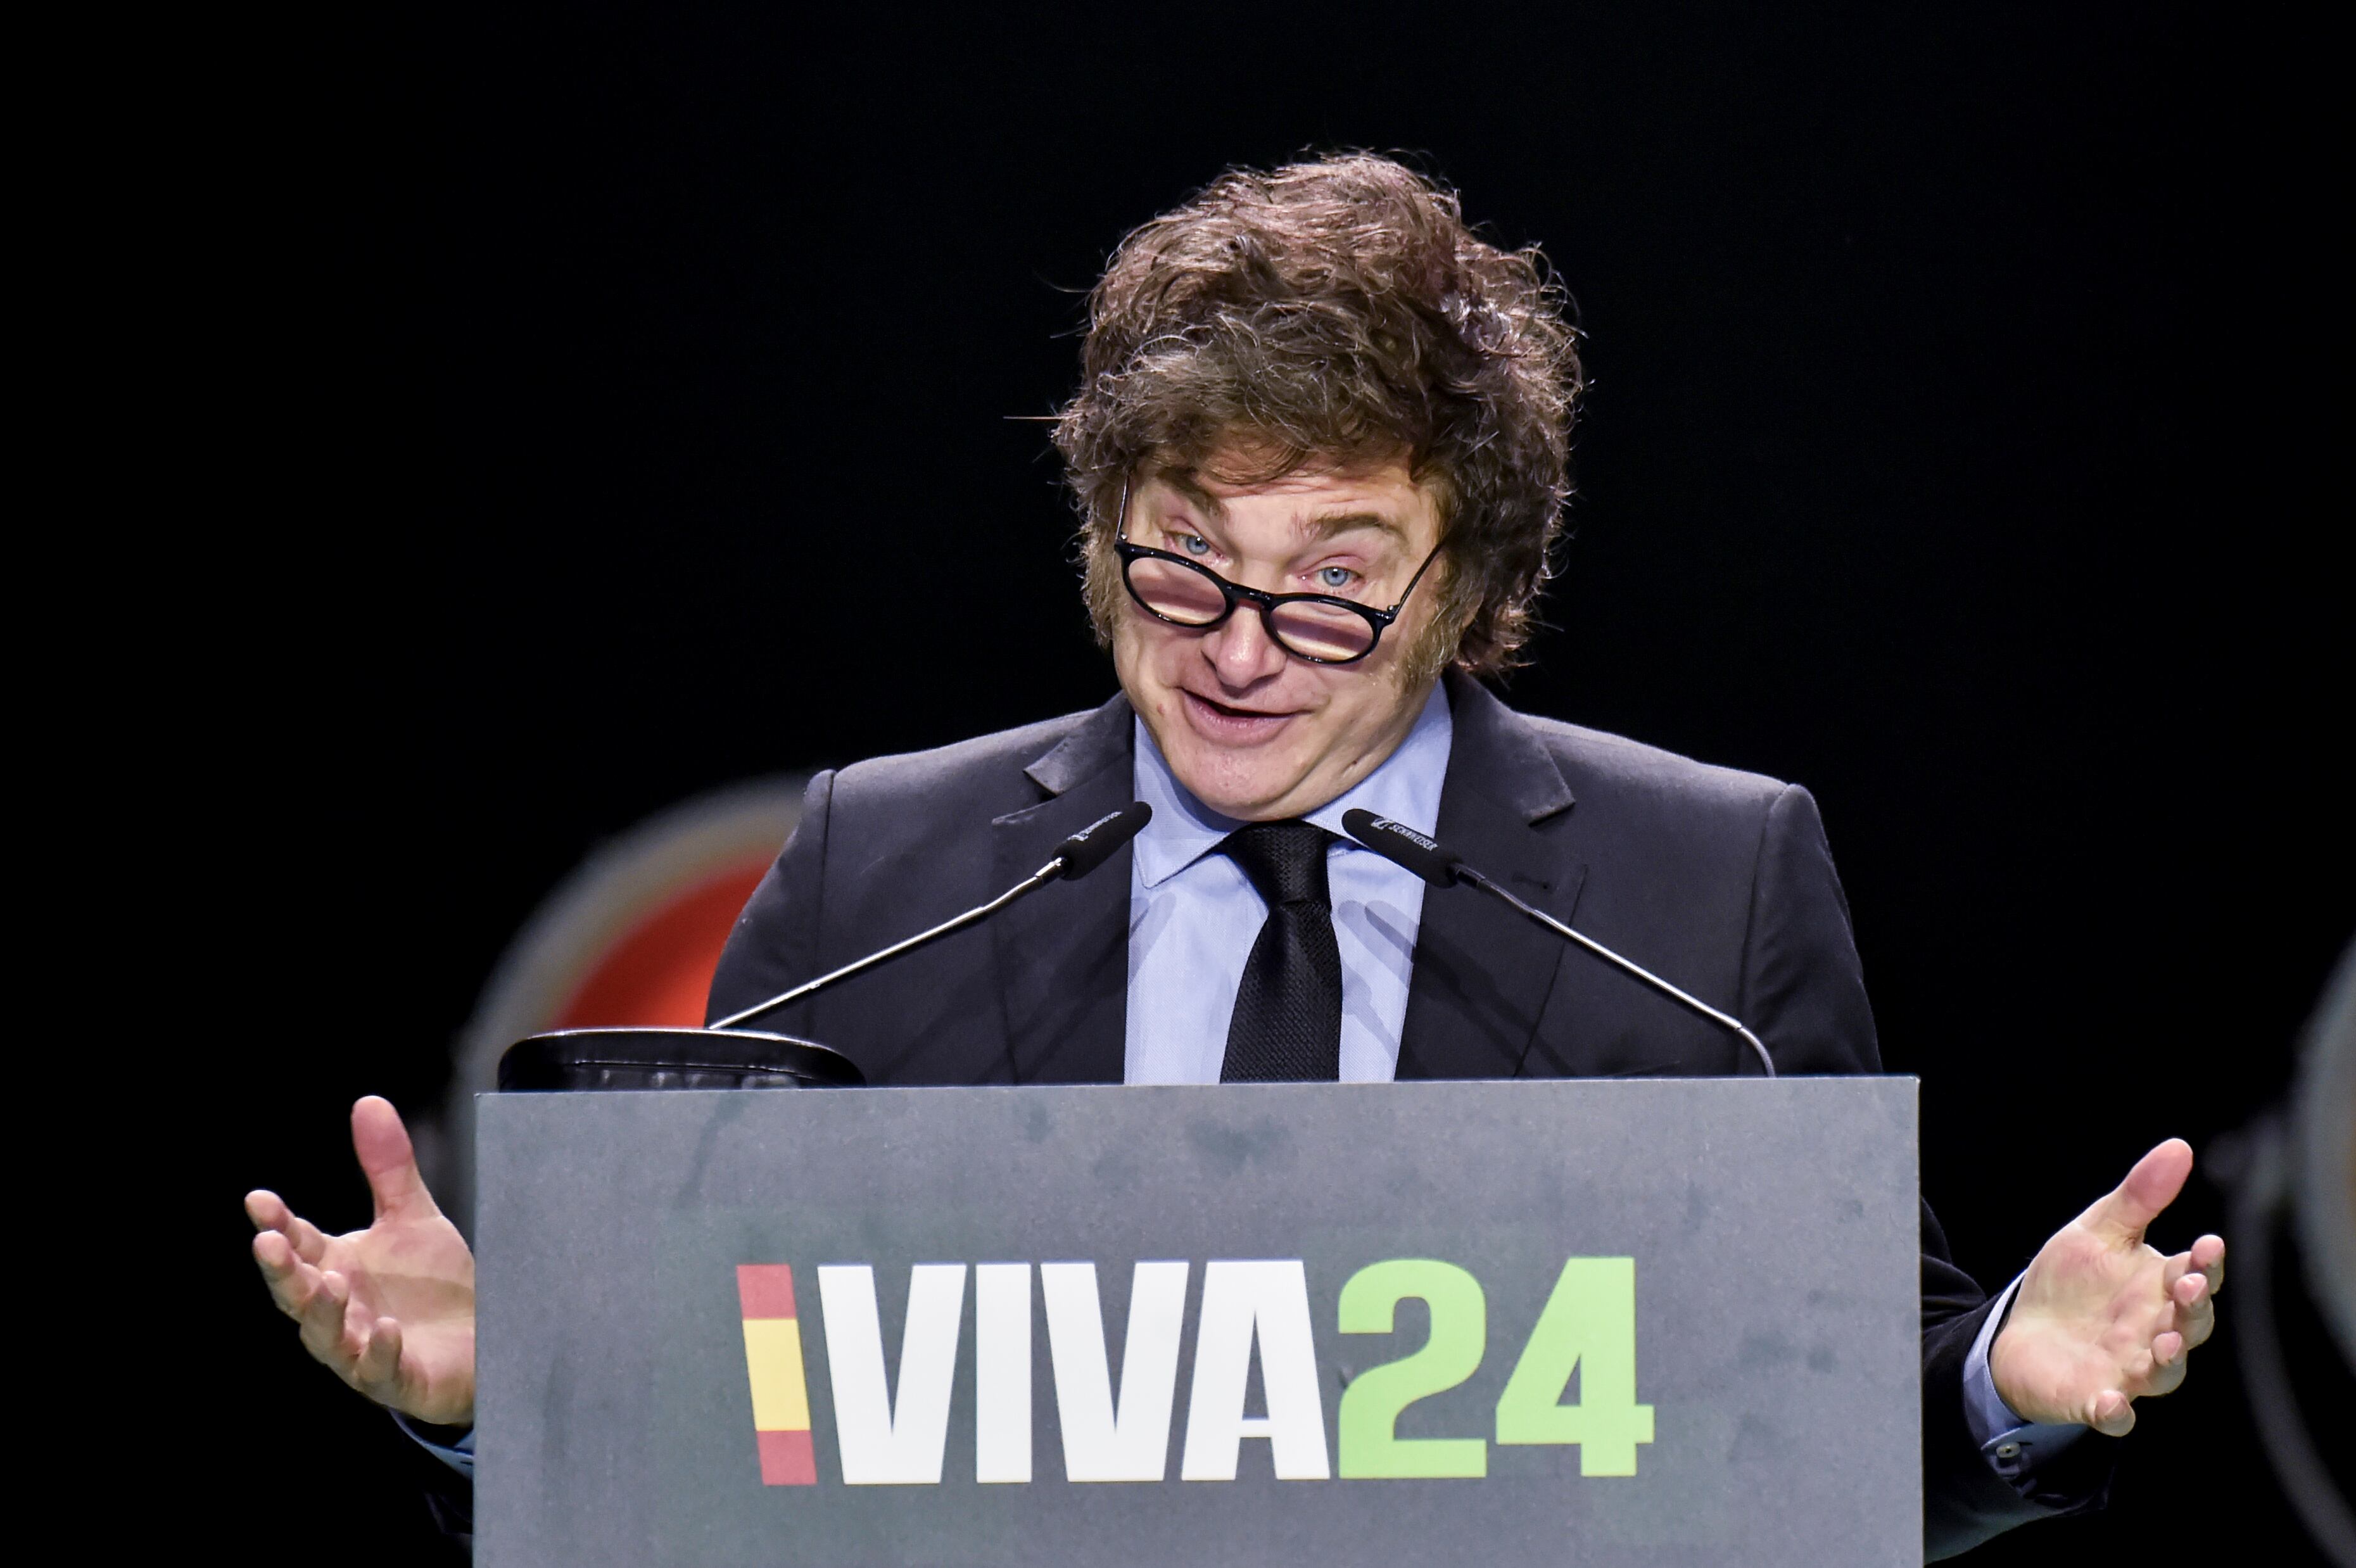 The president of Argentina, Javier Milei, at the 'Europa Viva 24' event in Madrid on Sunday.